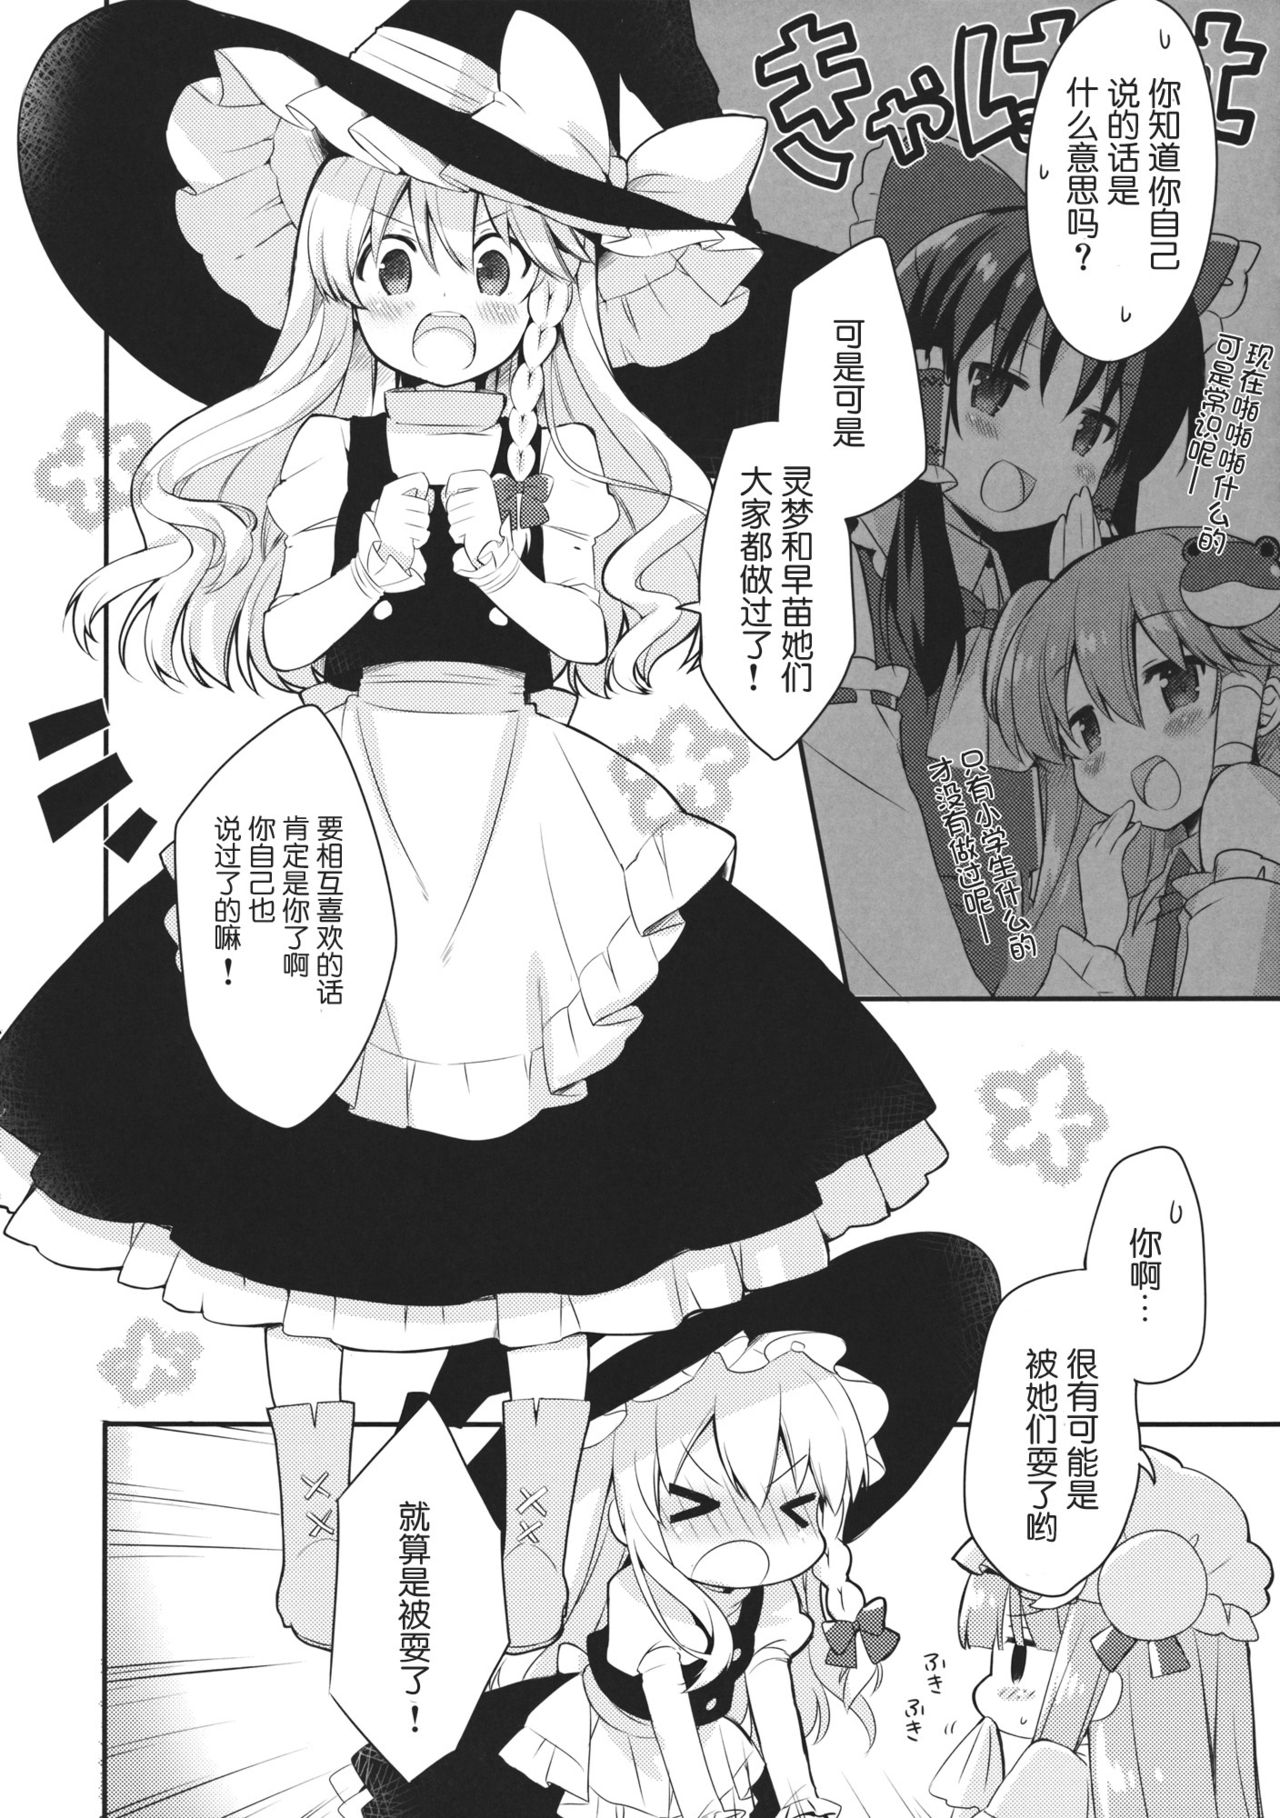 (Reitaisai 11) [D.N.A.Lab., Ichigosize (Miyasu Risa, Natsume Eri)] Lovely (Touhou Project) [Chinese] [绅士仓库汉化] (例大祭11) [D・N・A.Lab., いちごさいず (ミヤスリサ, なつめえり)] Lovely (東方Project)  [中文翻譯]